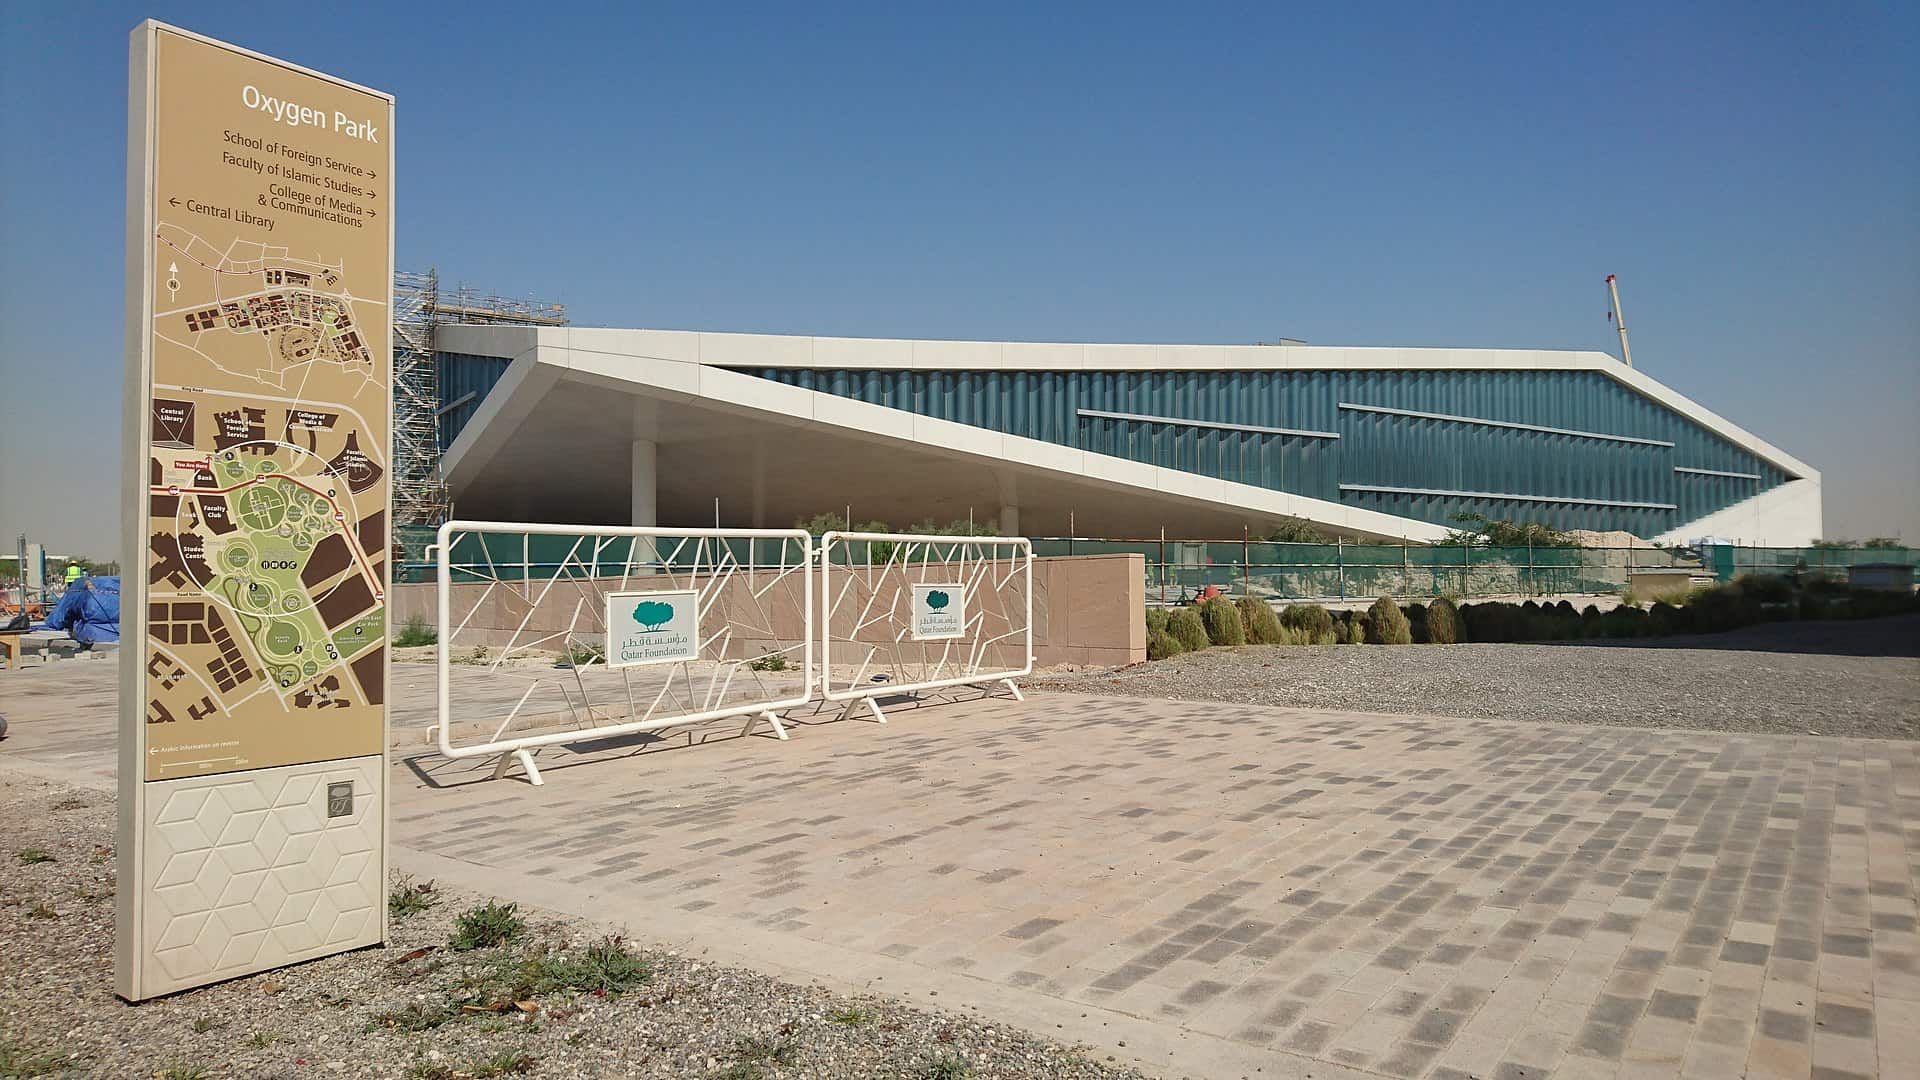 National archives of Qatar